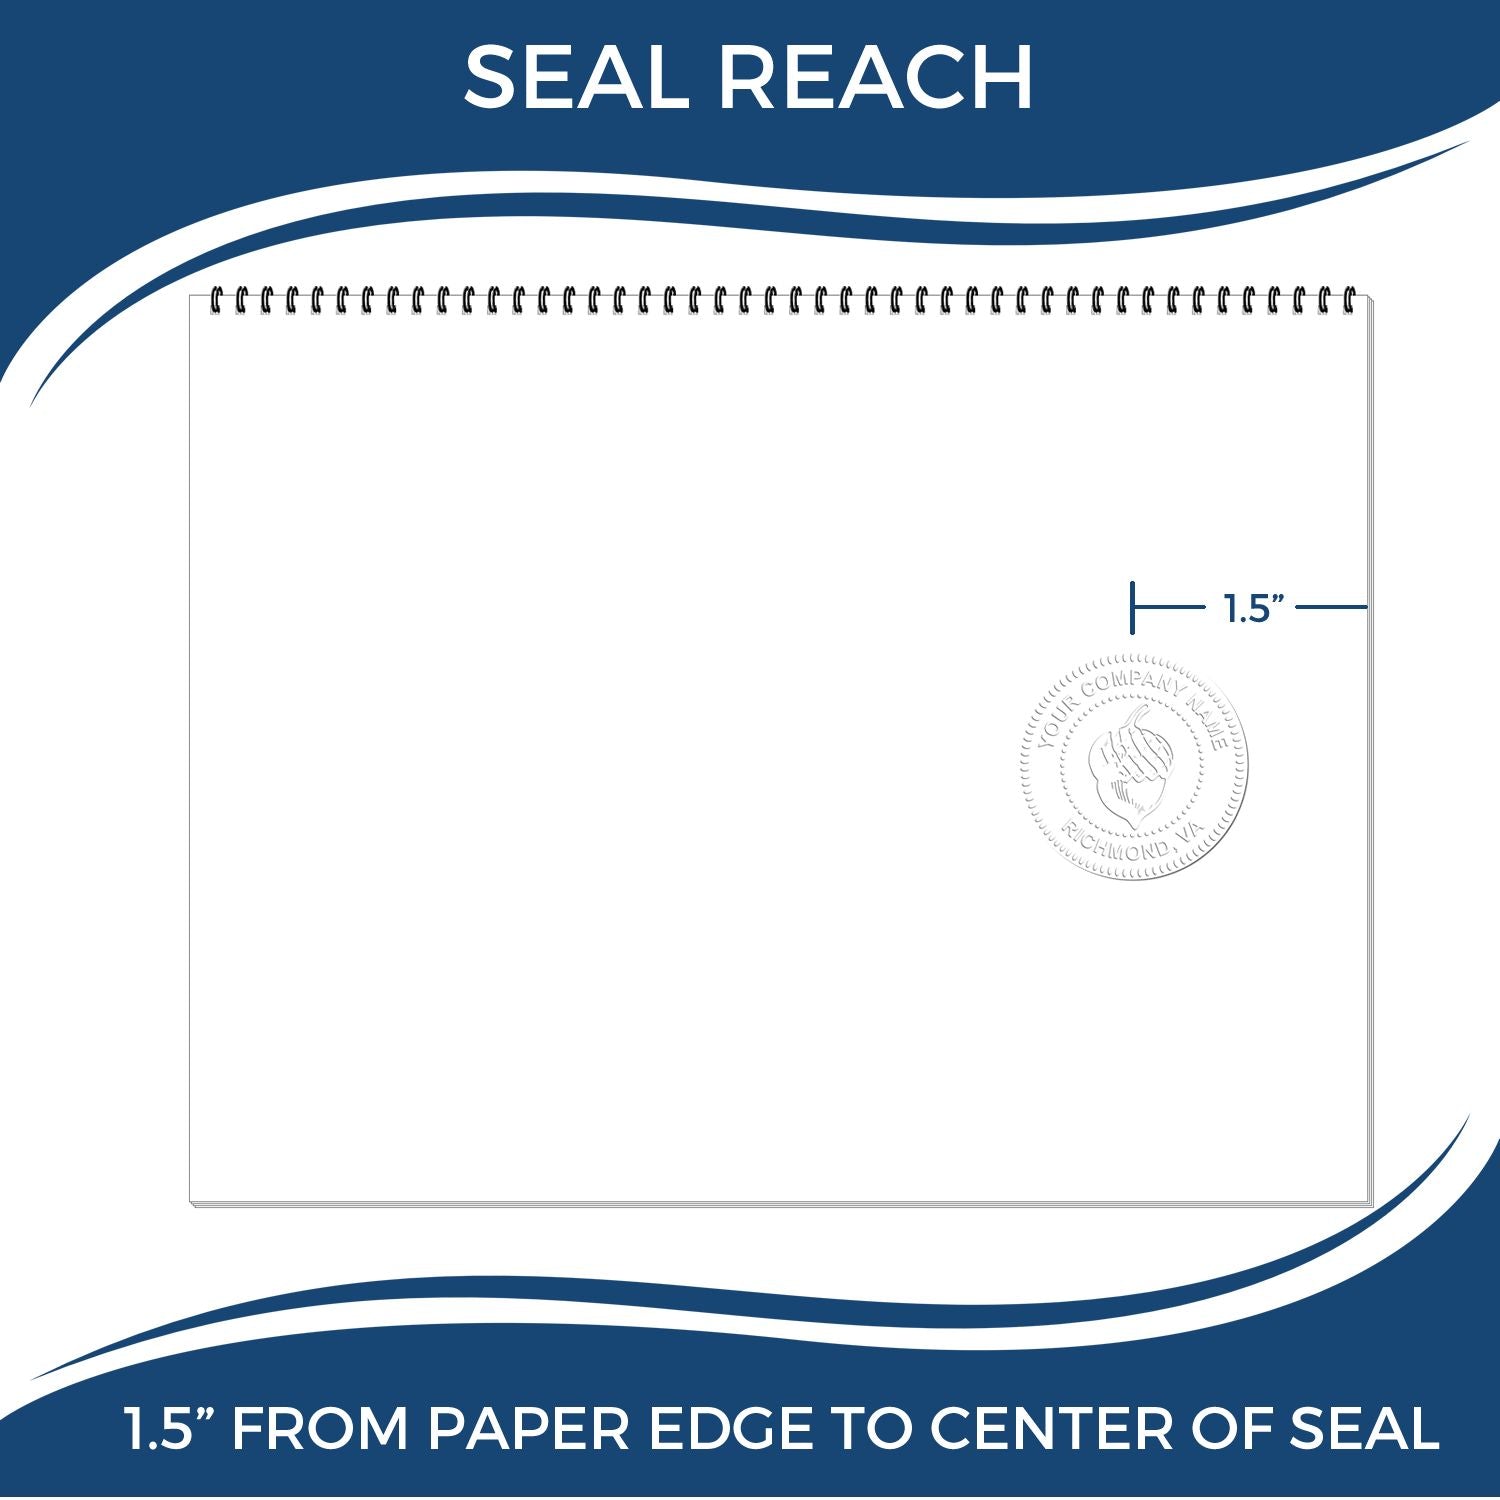 An infographic showing the seal reach which is represented by a ruler and a miniature seal image of the Wisconsin Engineer Desk Seal